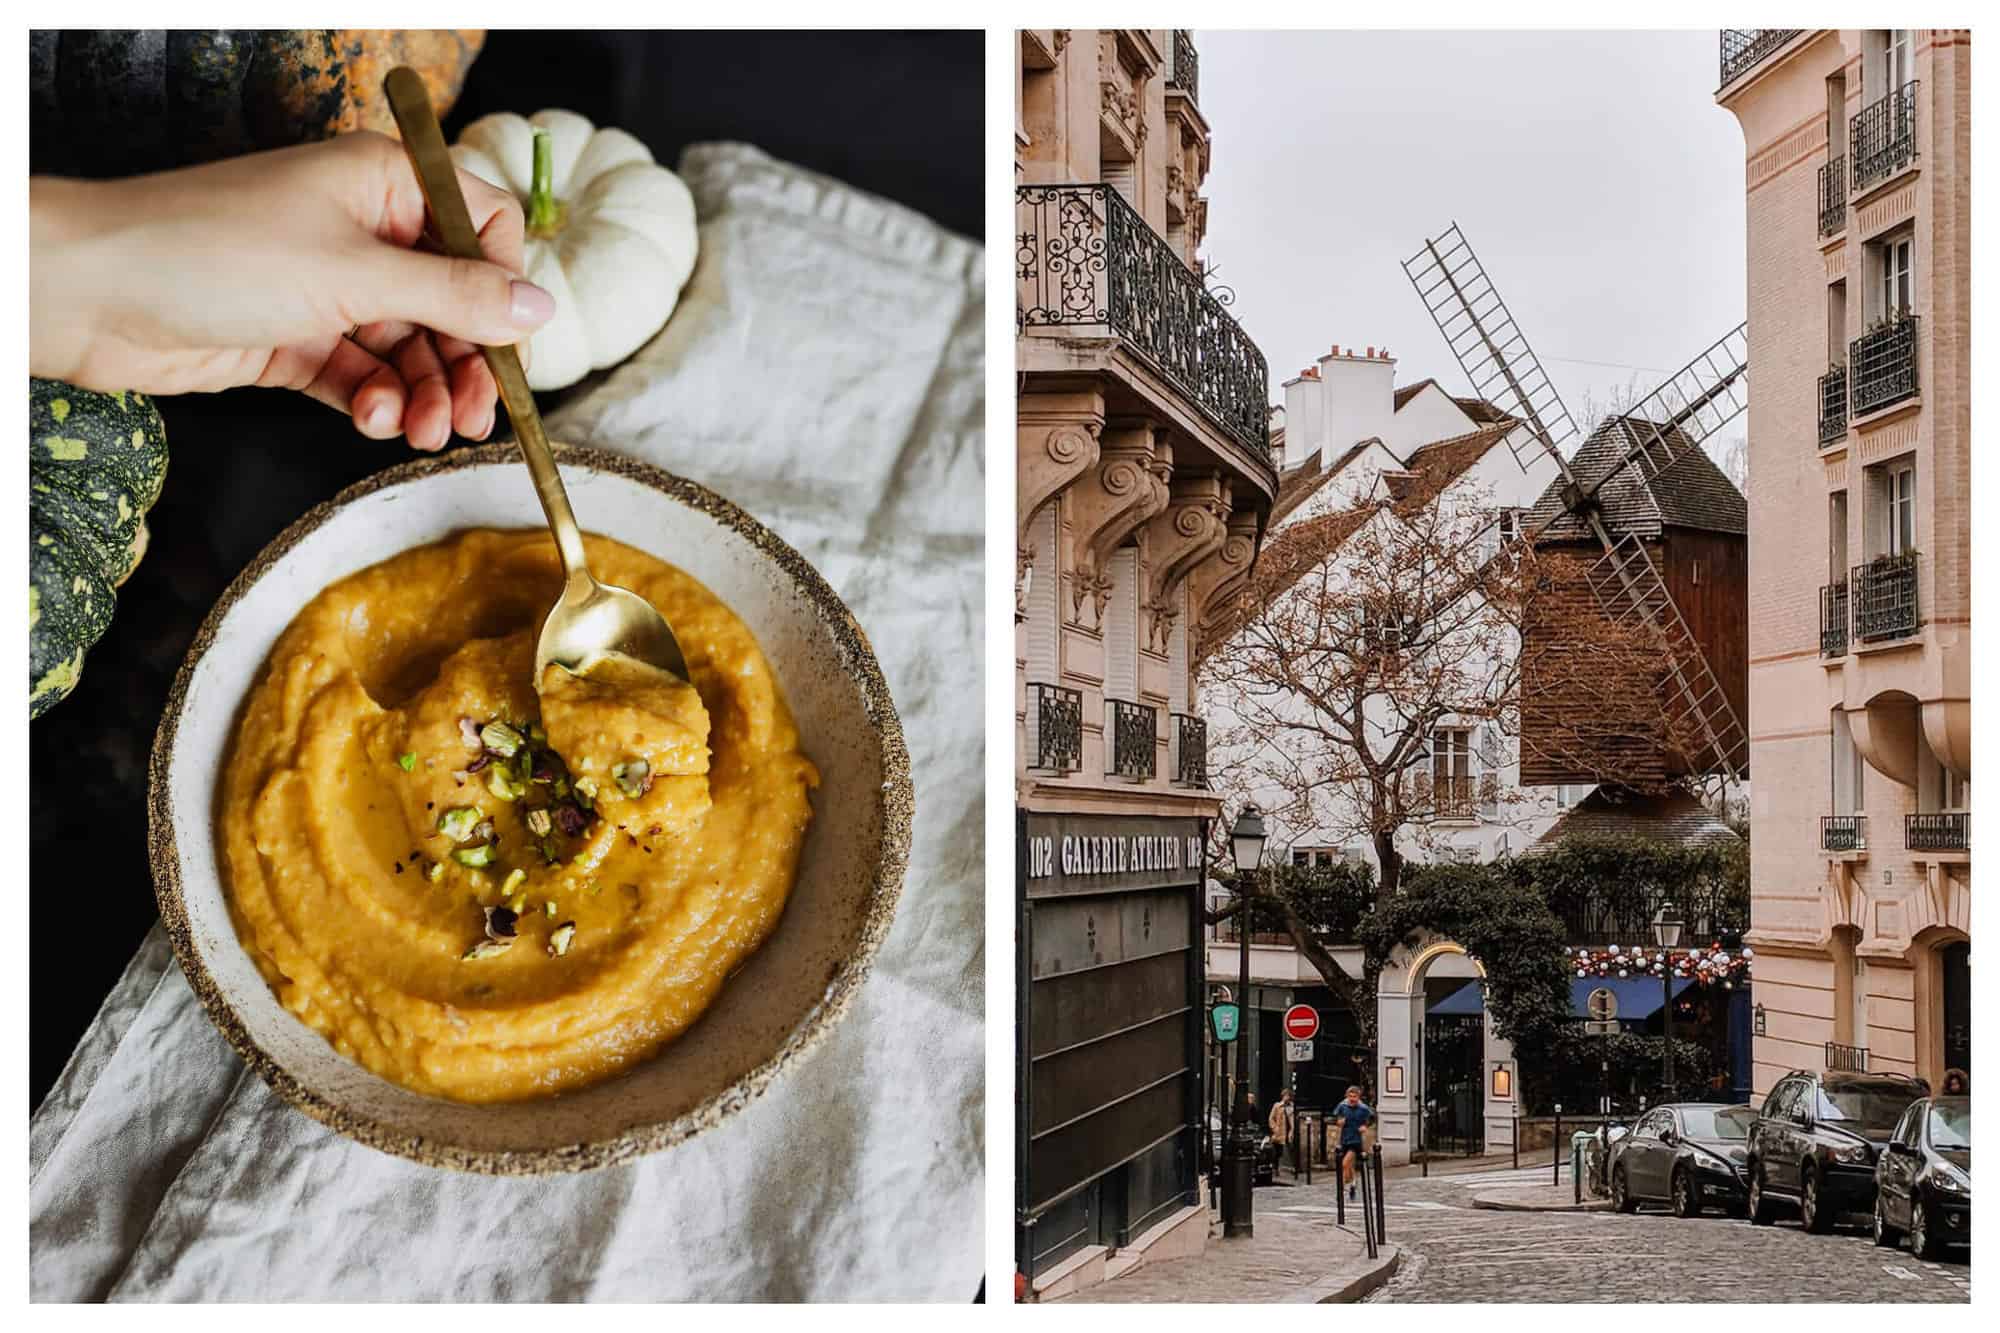 Left: A picture of a pumpkin soup as a hand stirs it with a spoon. Right: The famous Moulin de la Galette in rue Lepic, Montmartre.